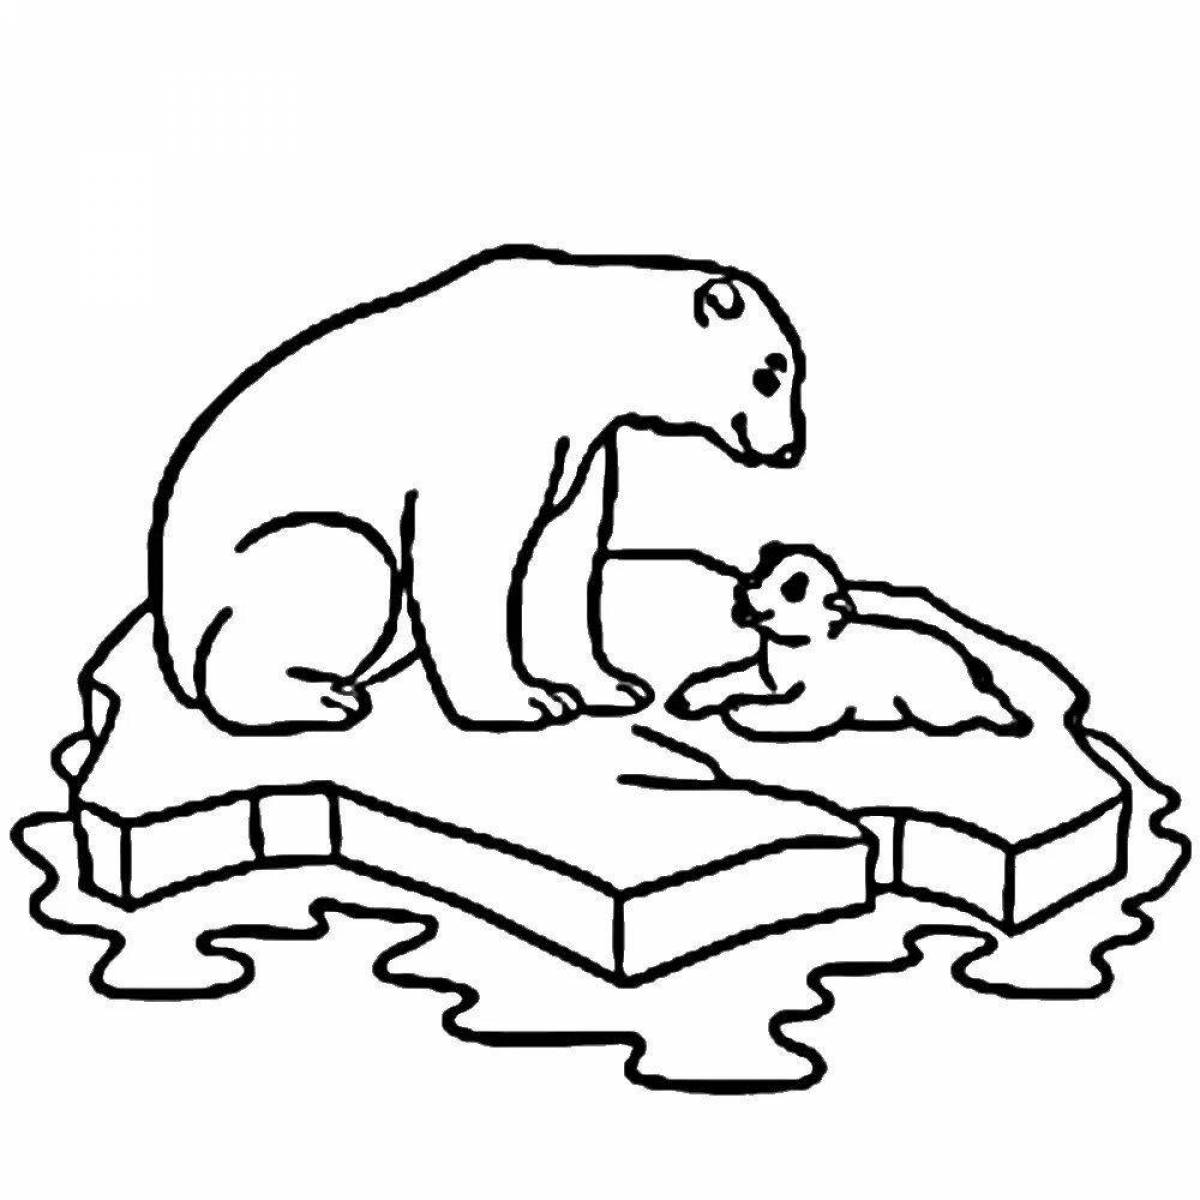 Amazing ice floe coloring page